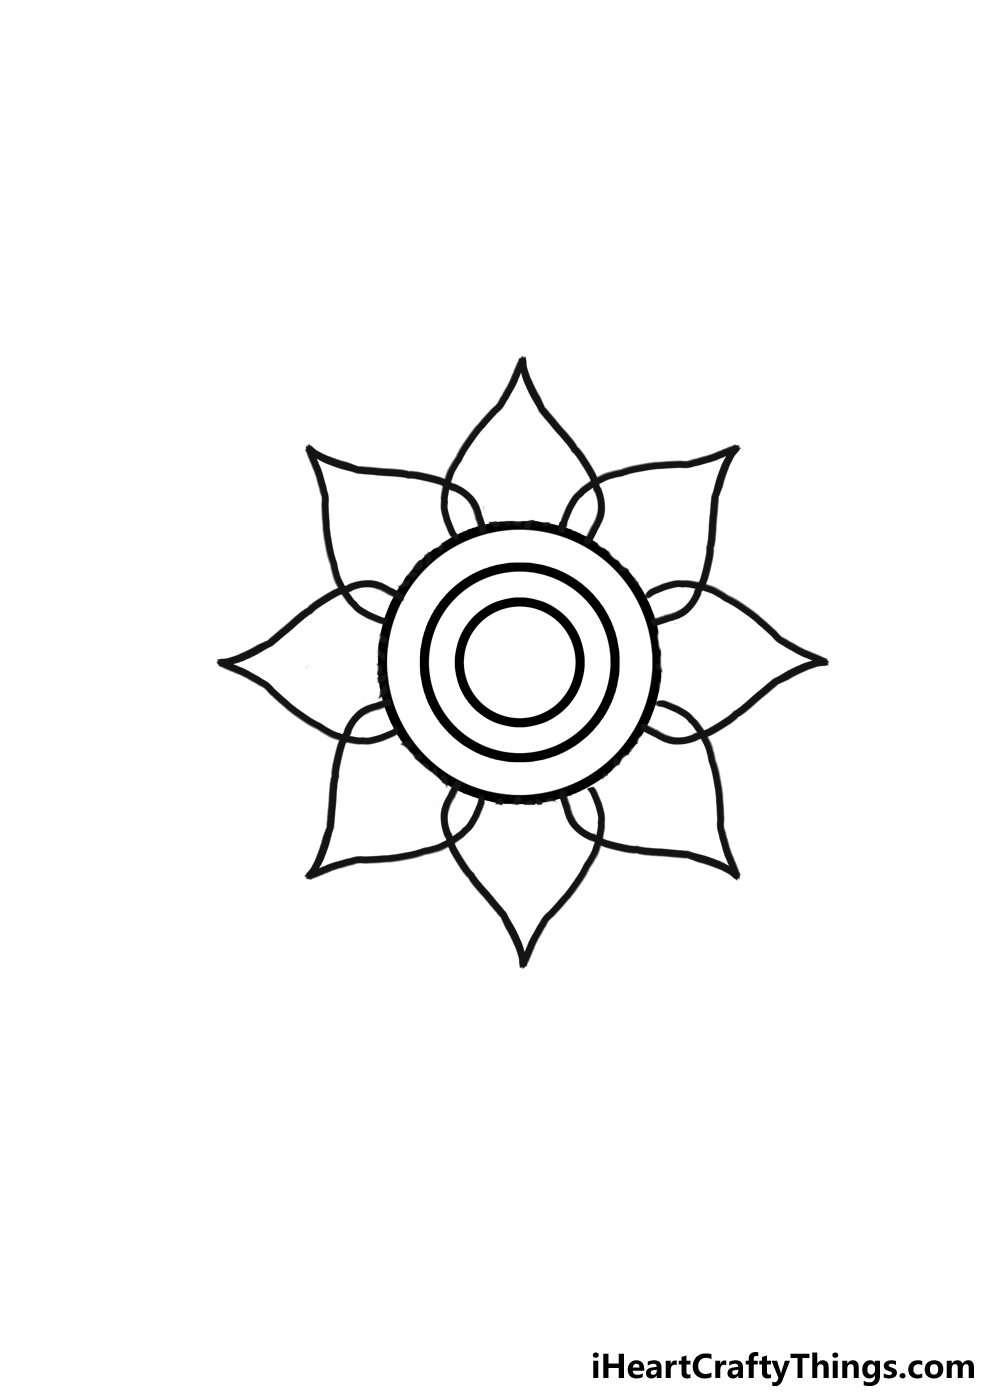 How to Draw A Simple Mandala step 4